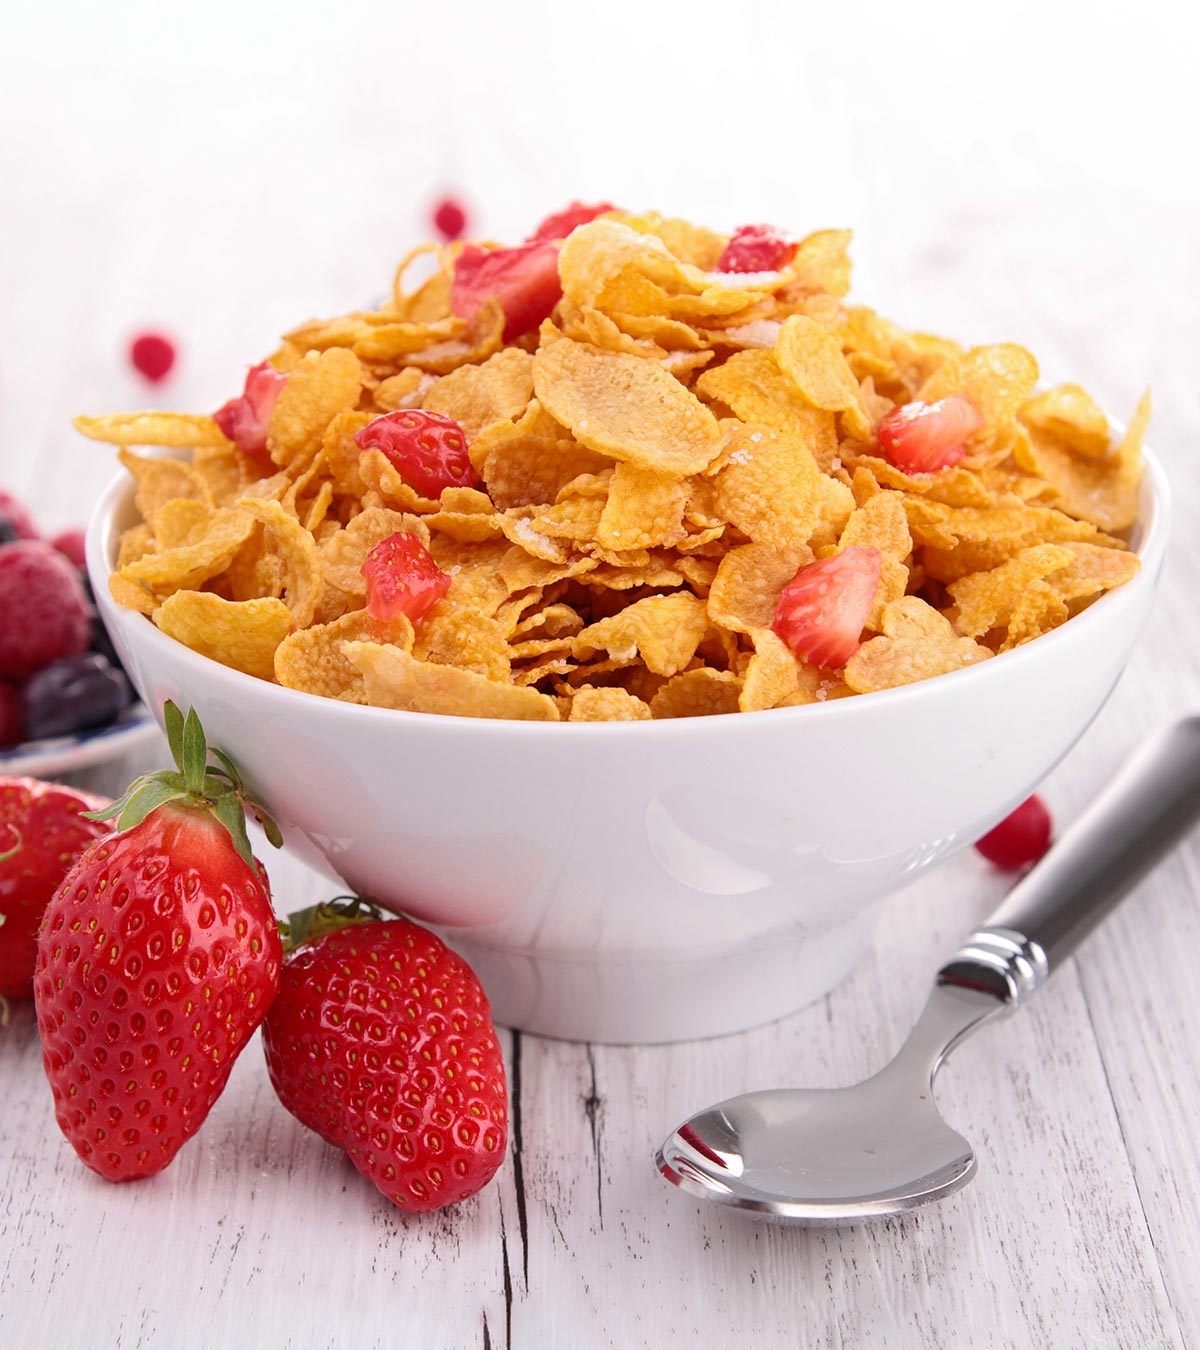 Top 10 Breakfast Cereals You Can Consume During Pregnancy